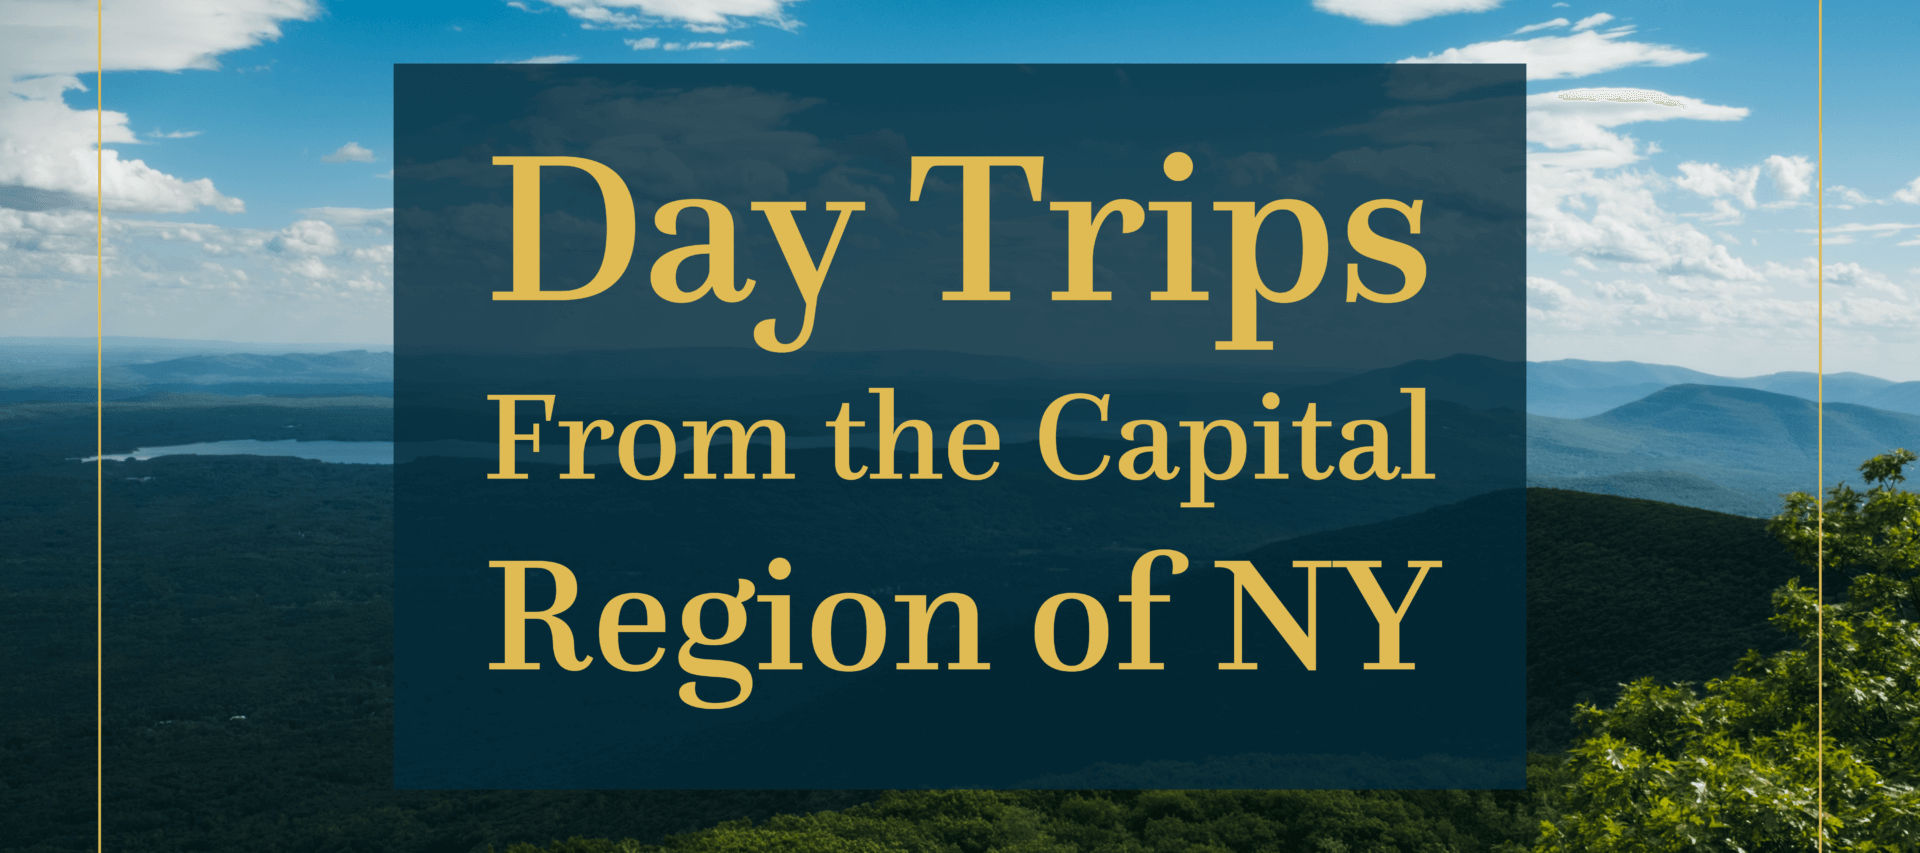 Day Trips From the Capital Region of NY